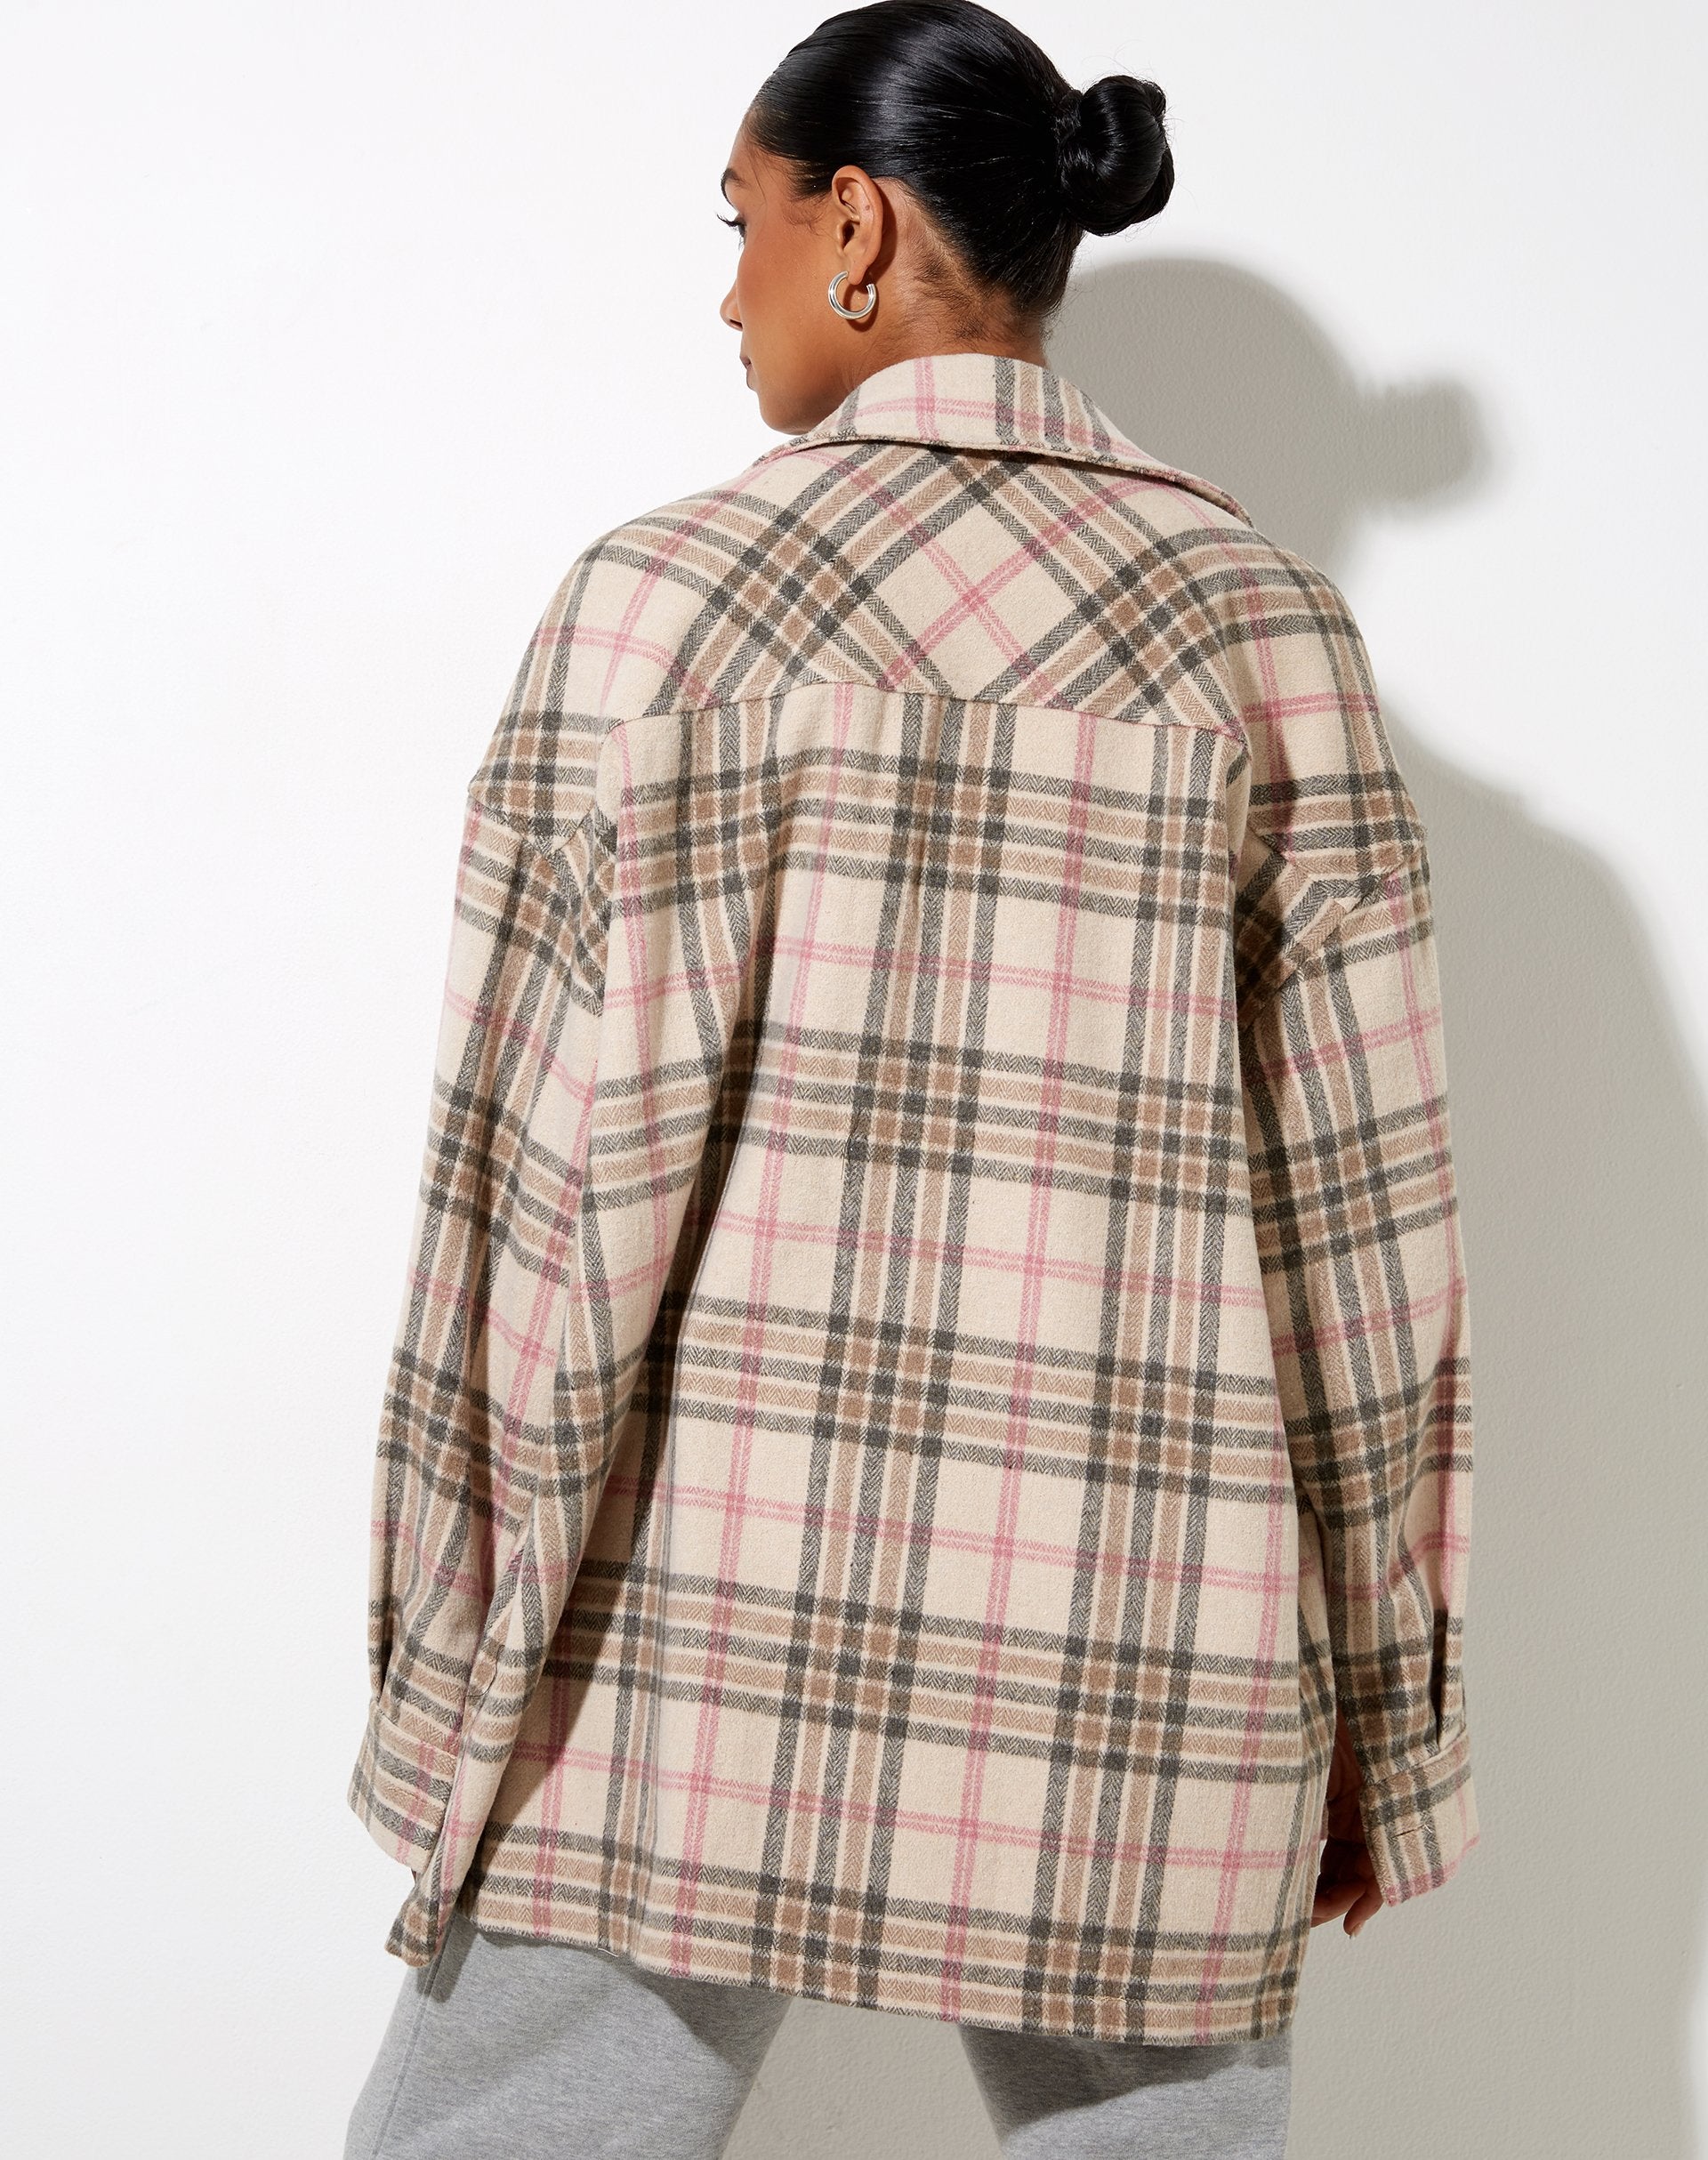 Image of Marcel Shirt in Big Check Pink White Tan